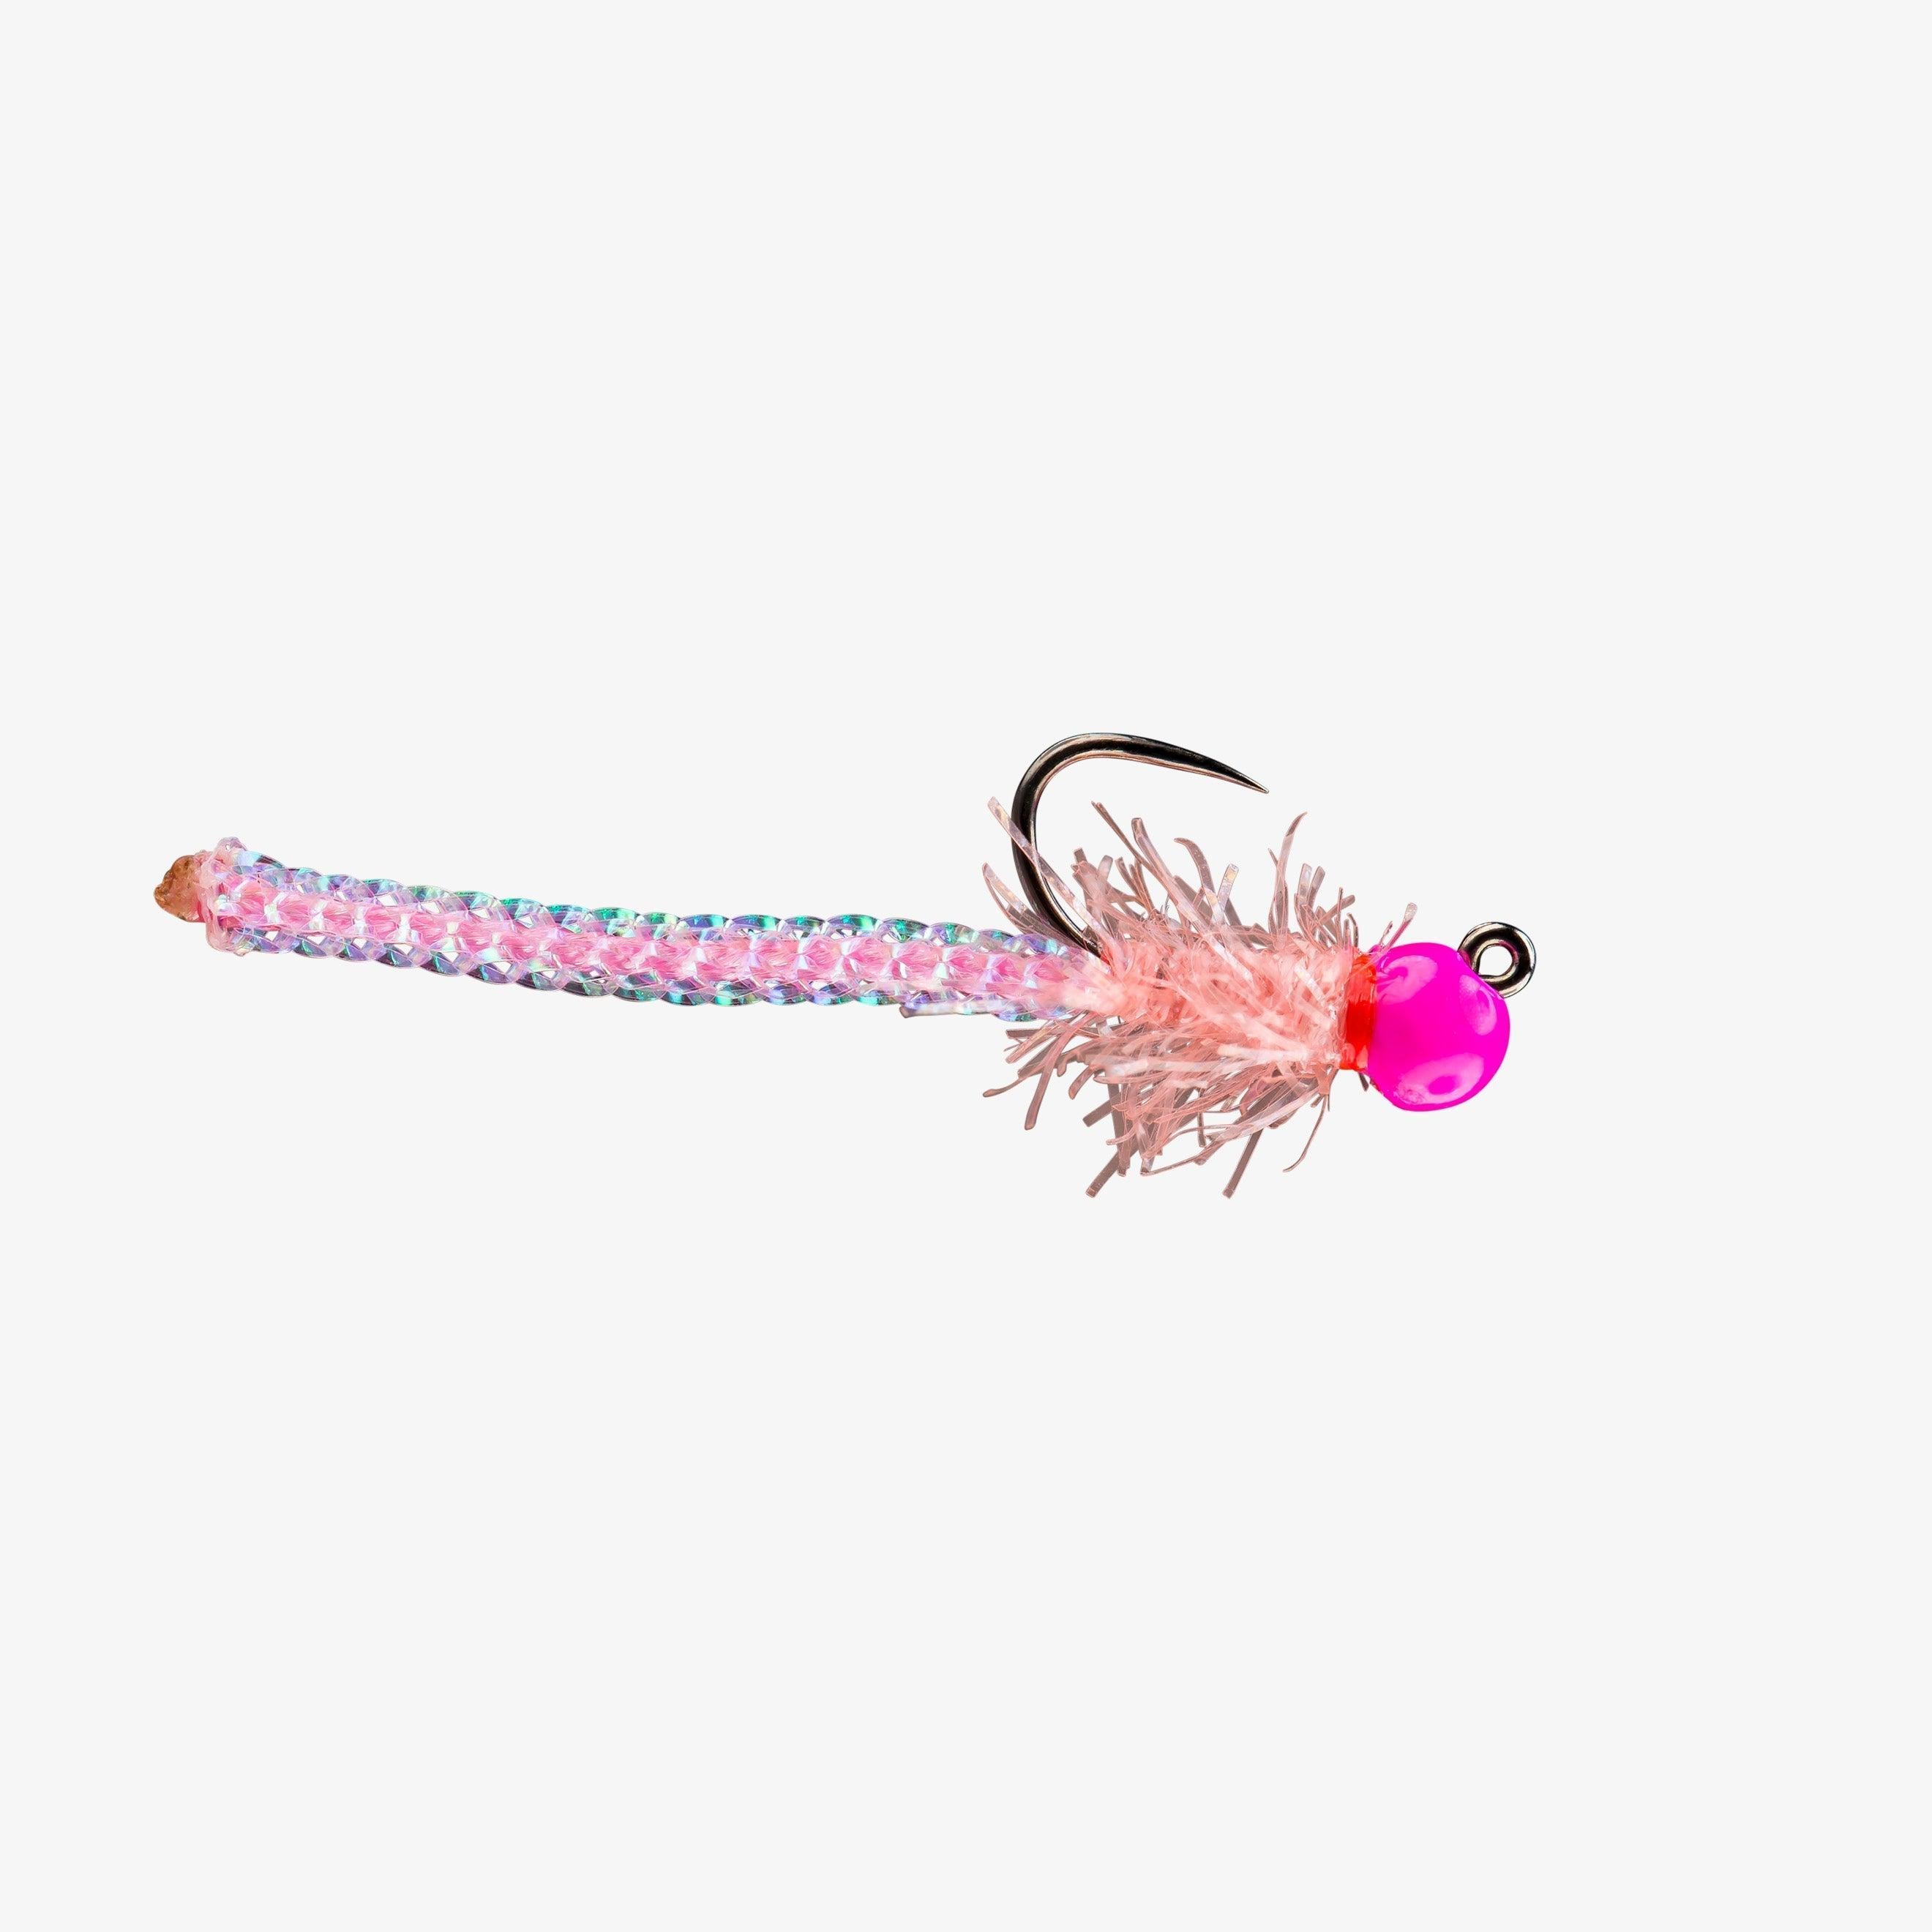 https://cdn.shopify.com/s/files/1/0689/7464/1466/products/Flies_Freshwater_TungstenFlies_RIO_sPoolNoodle_Pink.jpg?v=1679503219